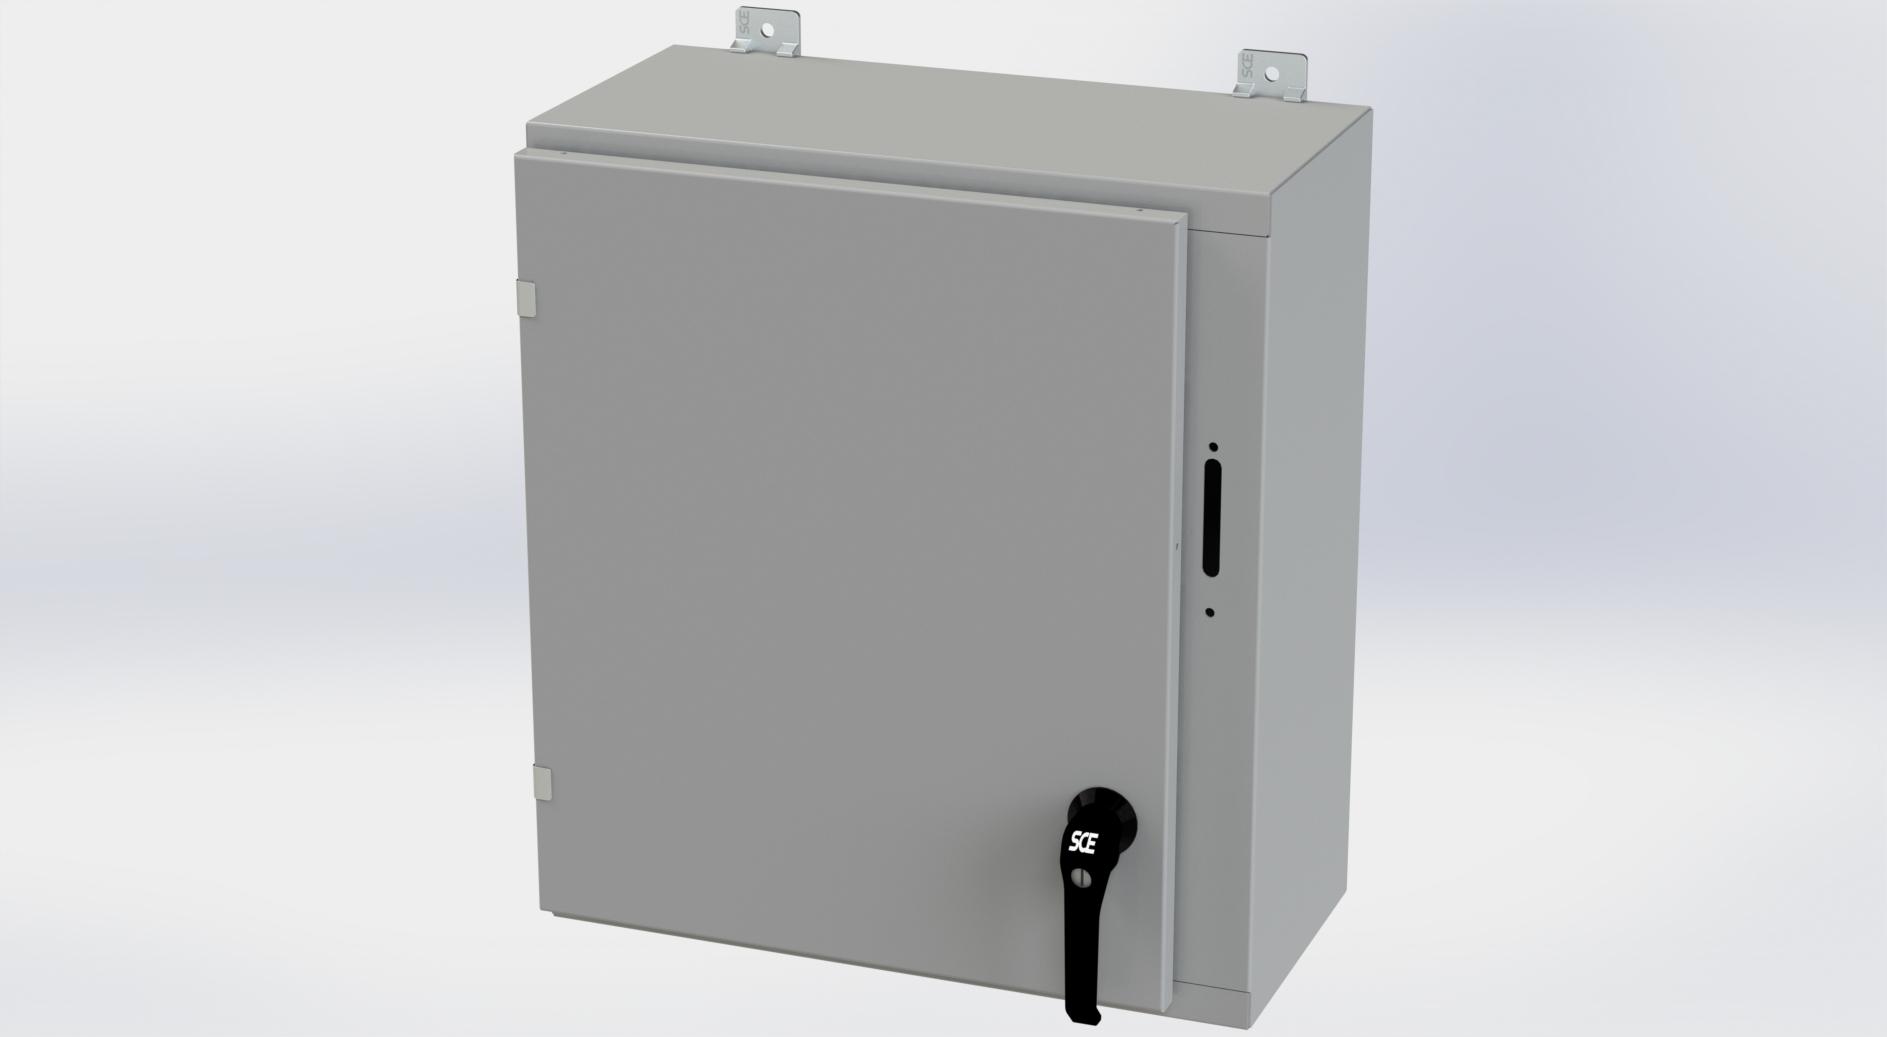 Saginaw Control SCE-24SA2210LPPL Obselete Use SCE-24XEL2110LP, Height:24.00", Width:21.38", Depth:10.00", ANSI-61 gray powder coating inside and out. Optional sub-panels are powder coated white.